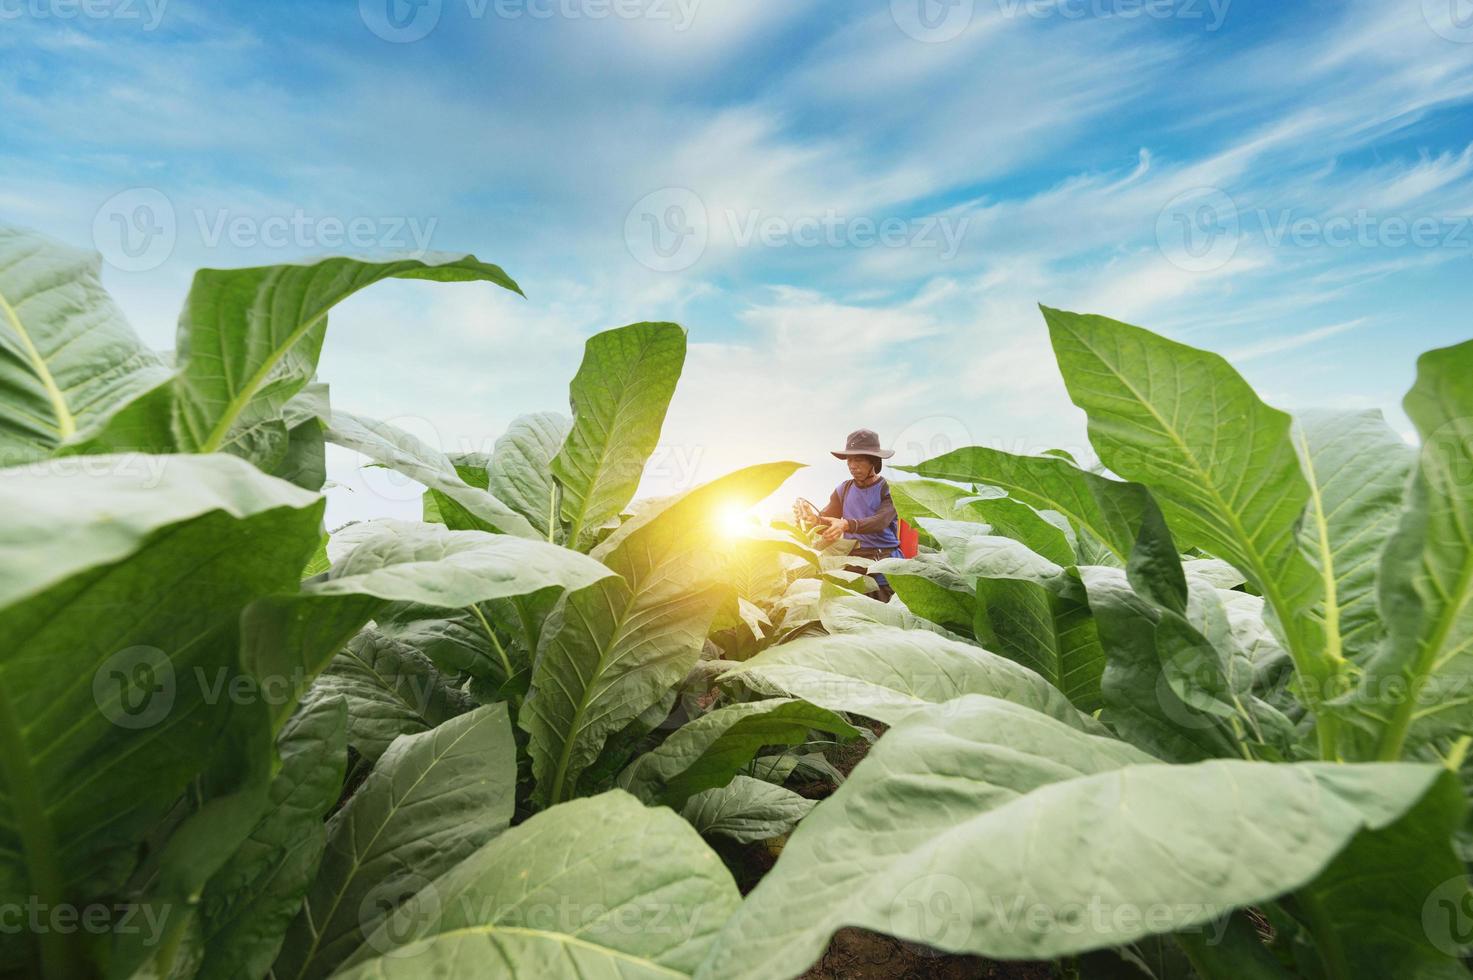 Farmers use agricultural equipment and tools. Mix maintenance potions, increase tobacco yield and choose new cultivation methods. Young farmers and tobacco farming photo